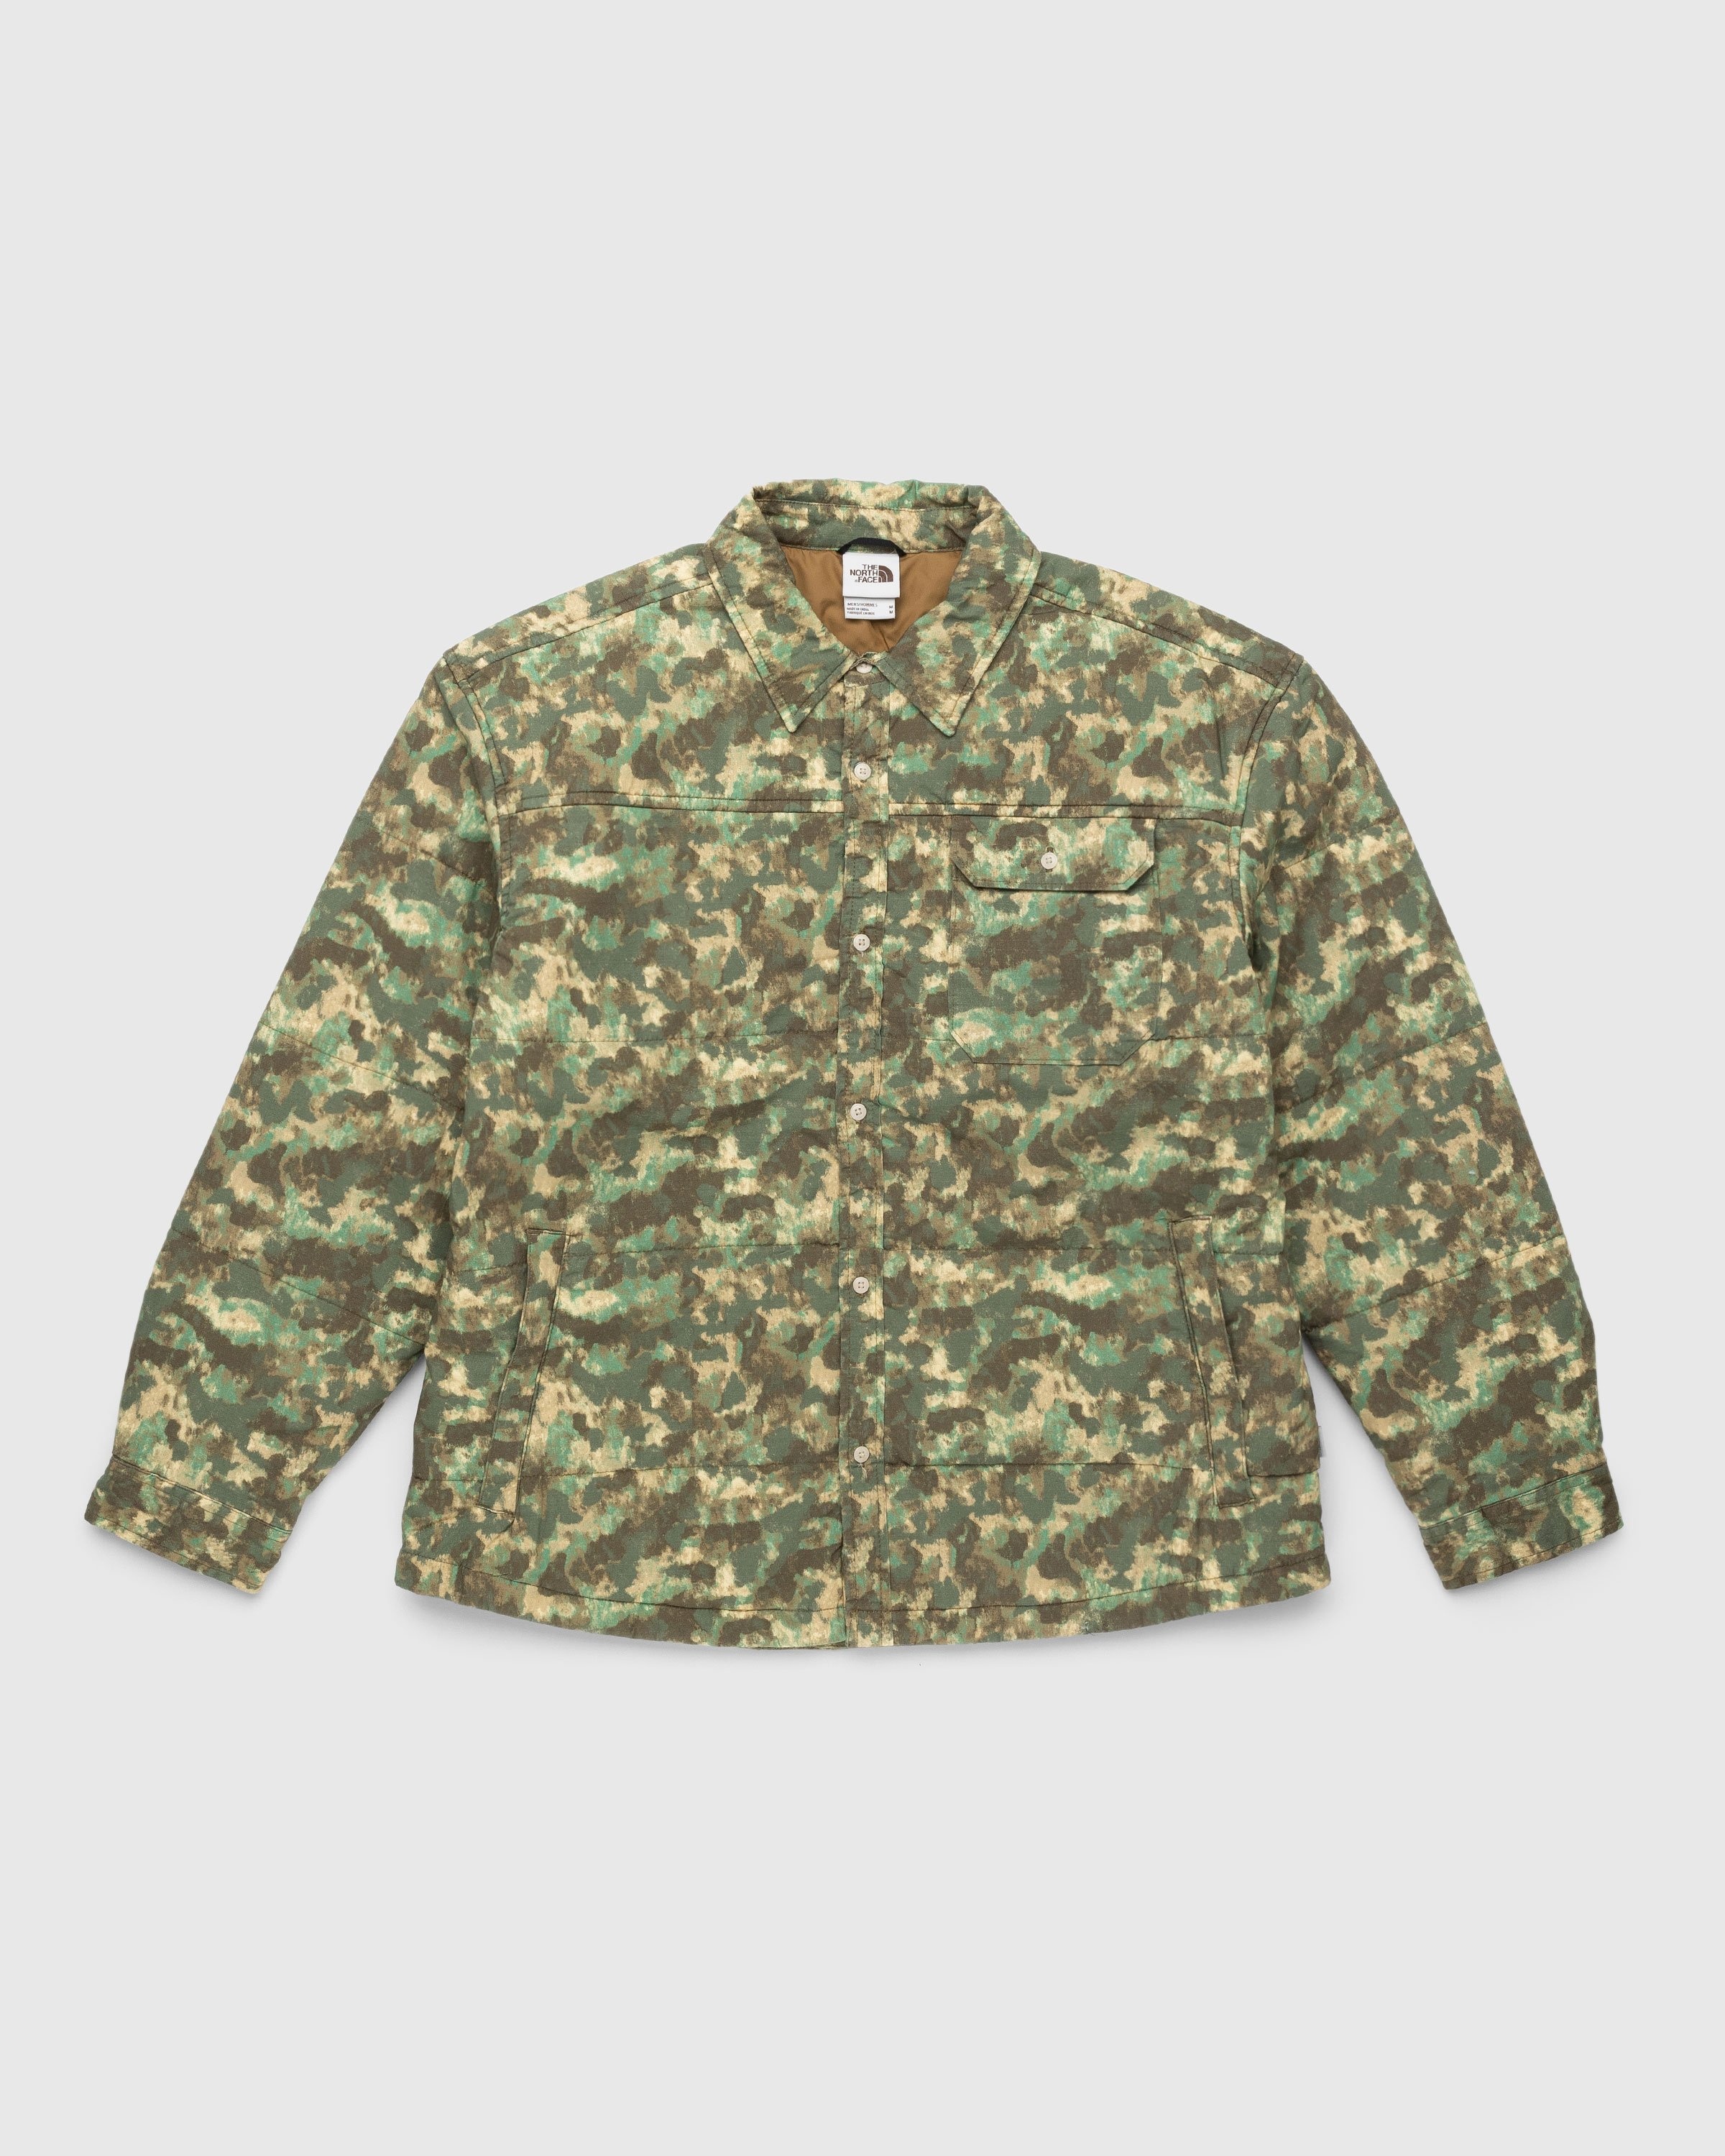 The North Face – M66 Utility Rain Jacket Military Olive/Stippled Camo Print - Outerwear - Green - Image 1